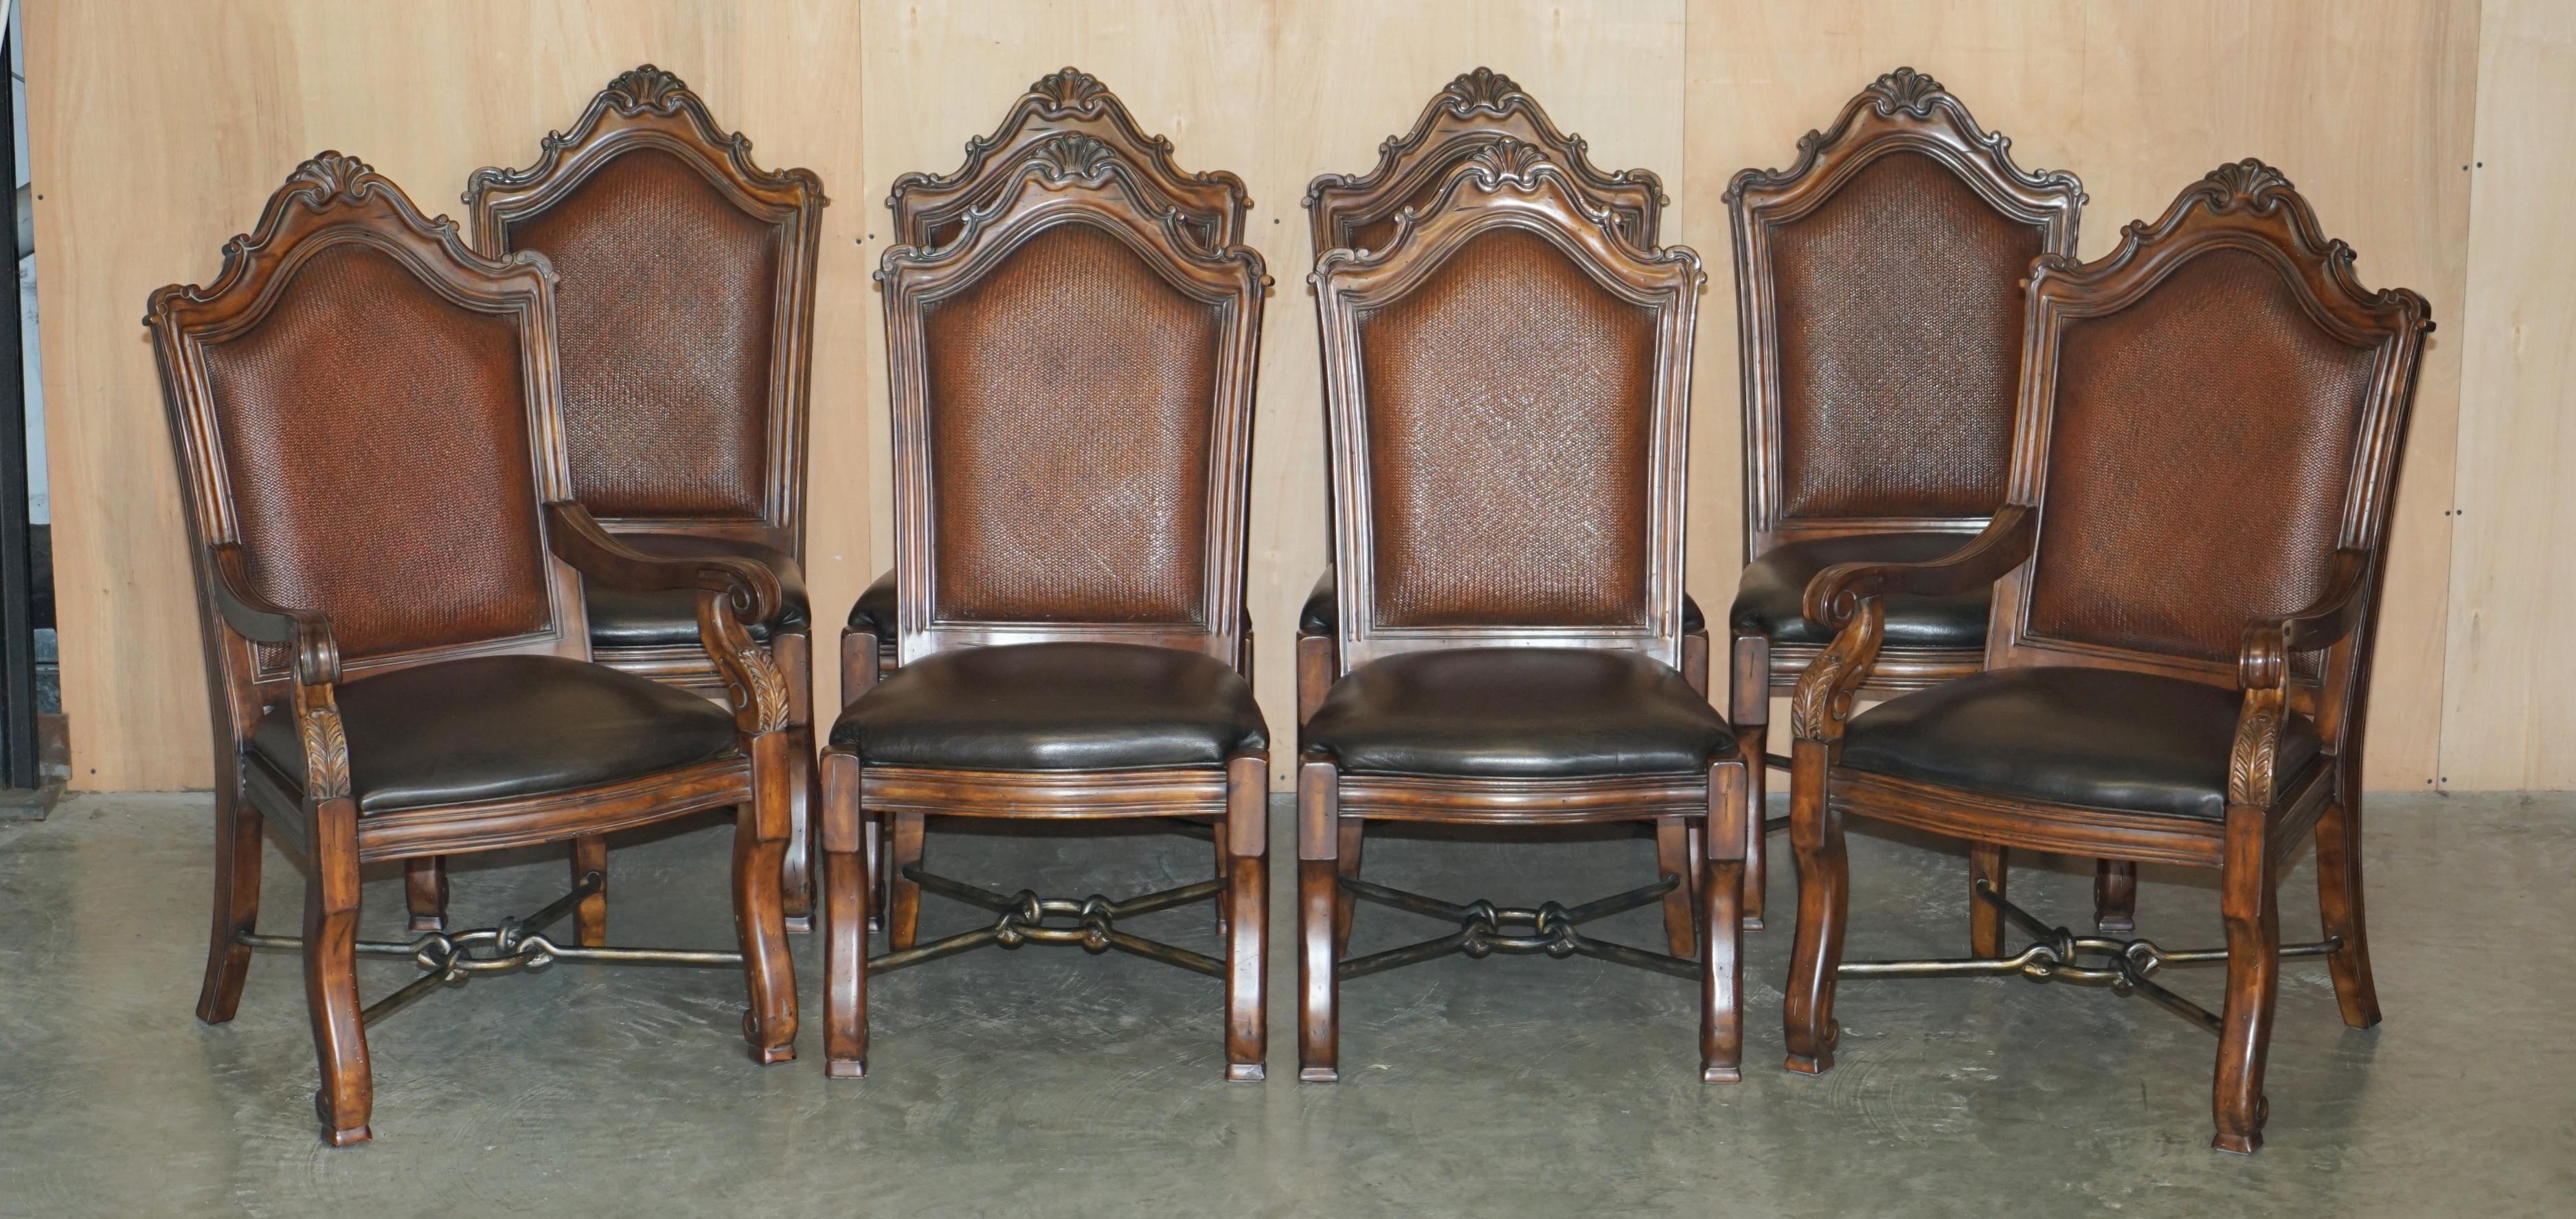 Royal House Antiques

Royal House Antiques is delighted to offer for sale this absolutely exquisite Thomasville Safari collection extending eight period dining table and chairs suite 

Please note the delivery fee listed is just a guide, it covers